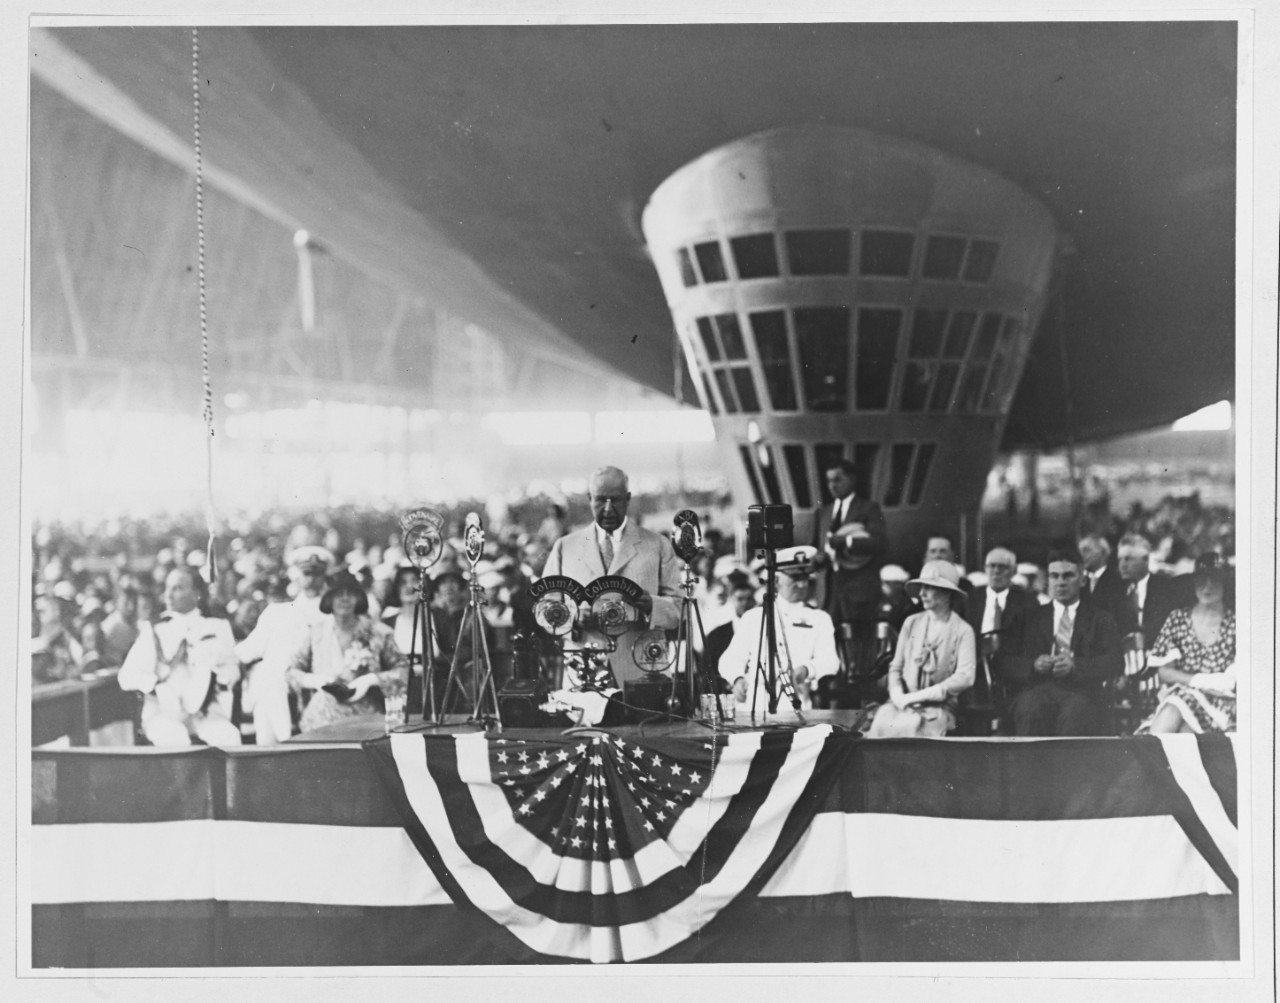 Photo #: NH 42163  Christening of USS Akron (ZRS-4), 8 August 1931